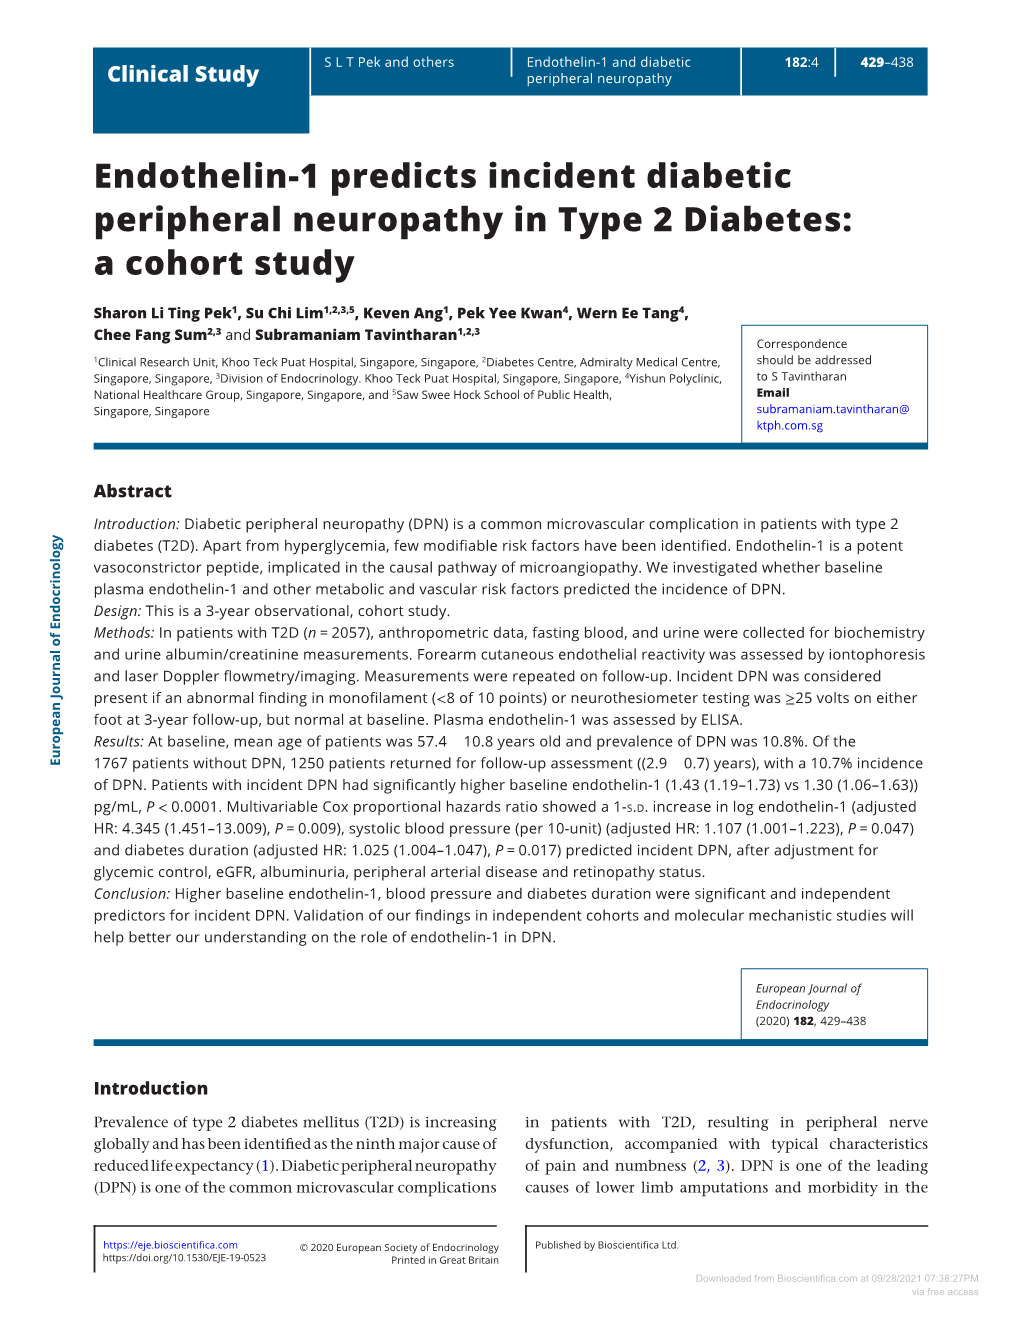 Endothelin-1 Predicts Incident Diabetic Peripheral Neuropathy in Type 2 Diabetes: a Cohort Study